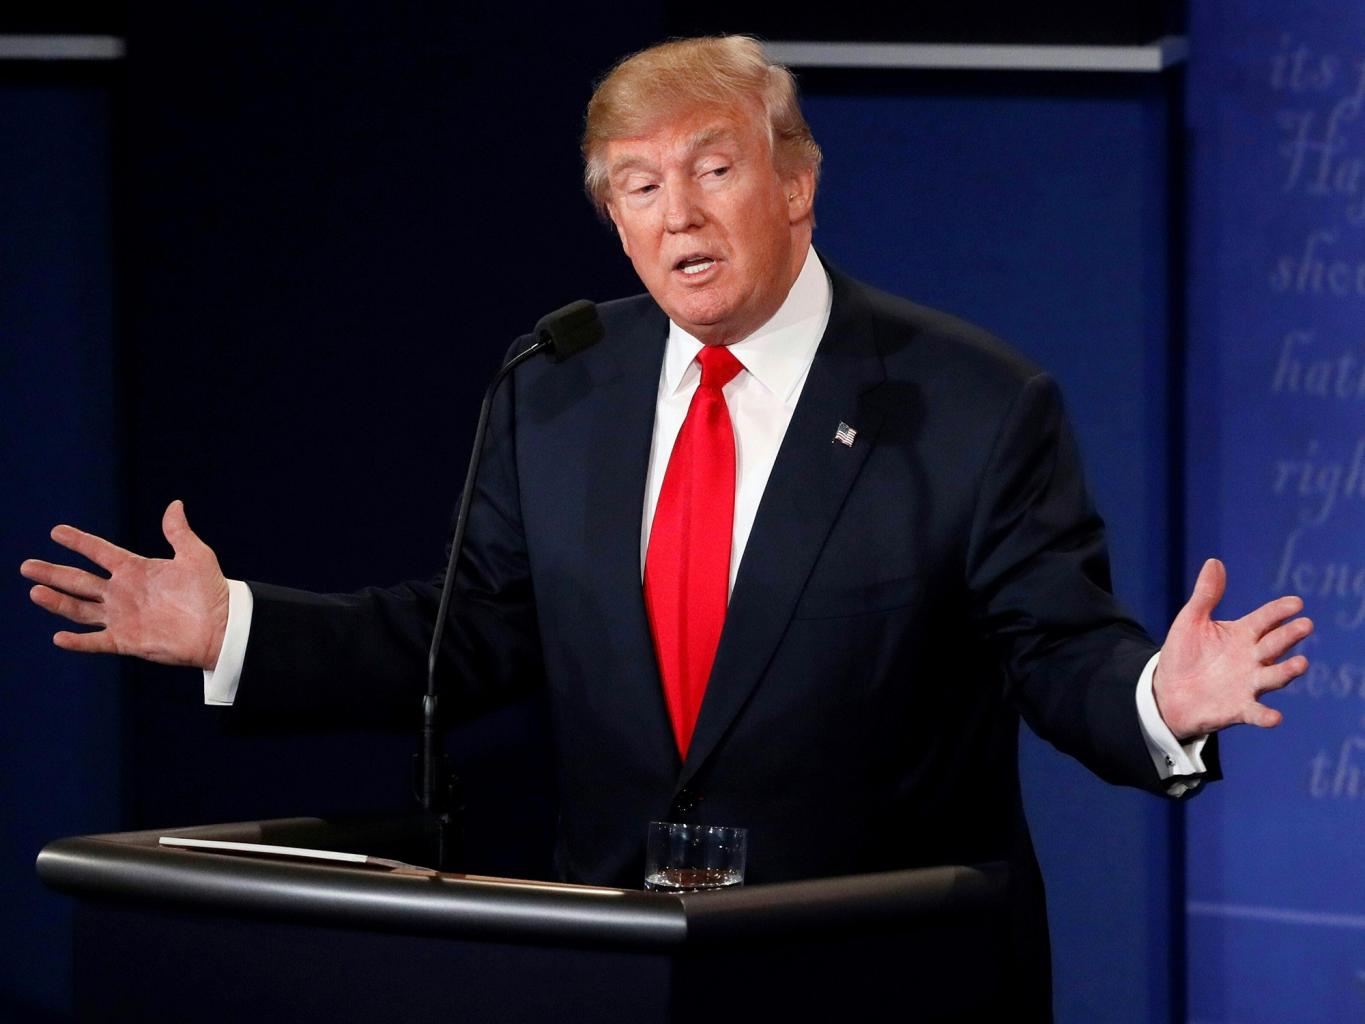 Donald Trump Claims Clinton Is Responsible for Allegations He Attacked Women